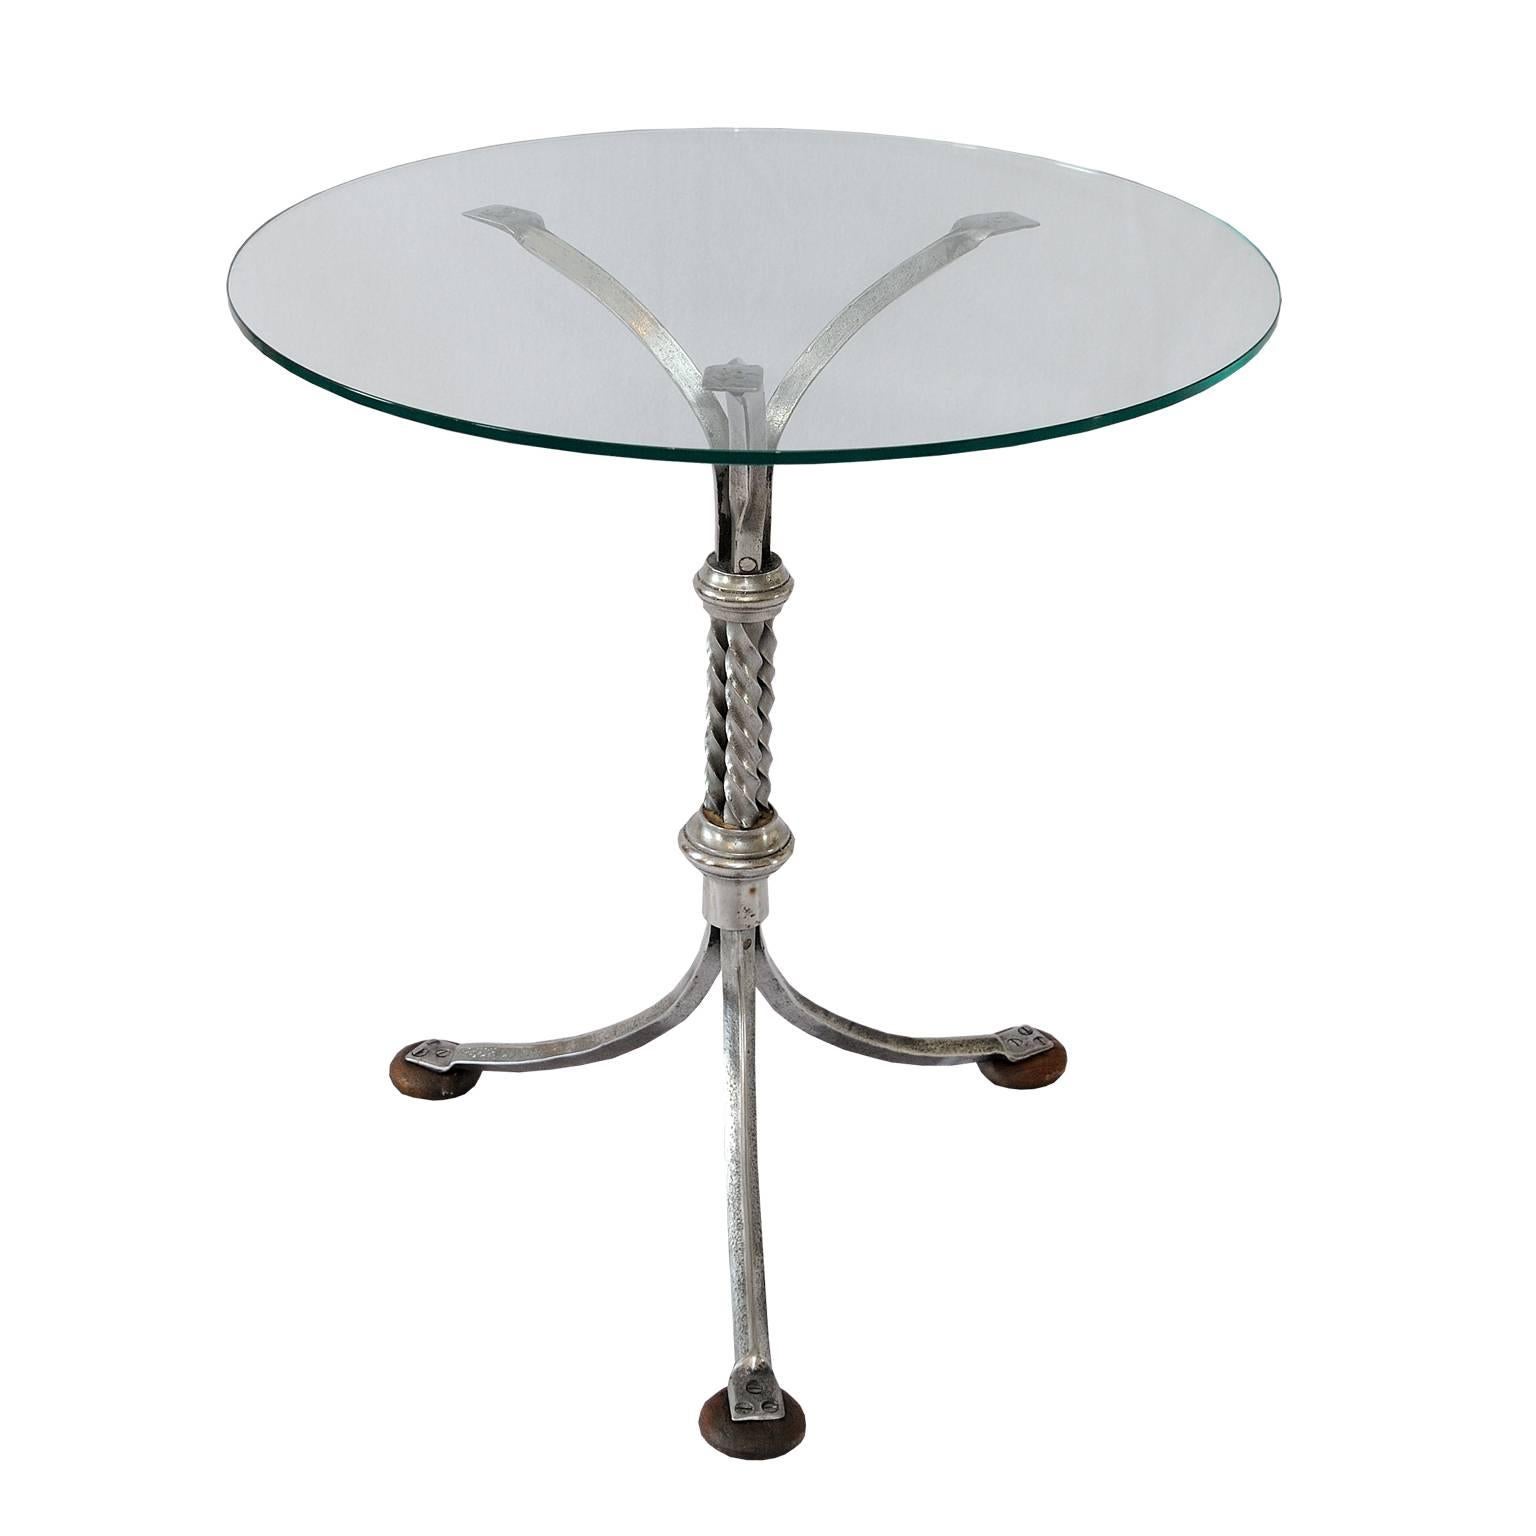 This is a superb pair of mid-19th century polished wrought iron ships tables with contemporary polished glass tops. (The tables now have small mahogany bun feet which could be removed if you wish to screw the tables to the deck of a boat or Yacht,